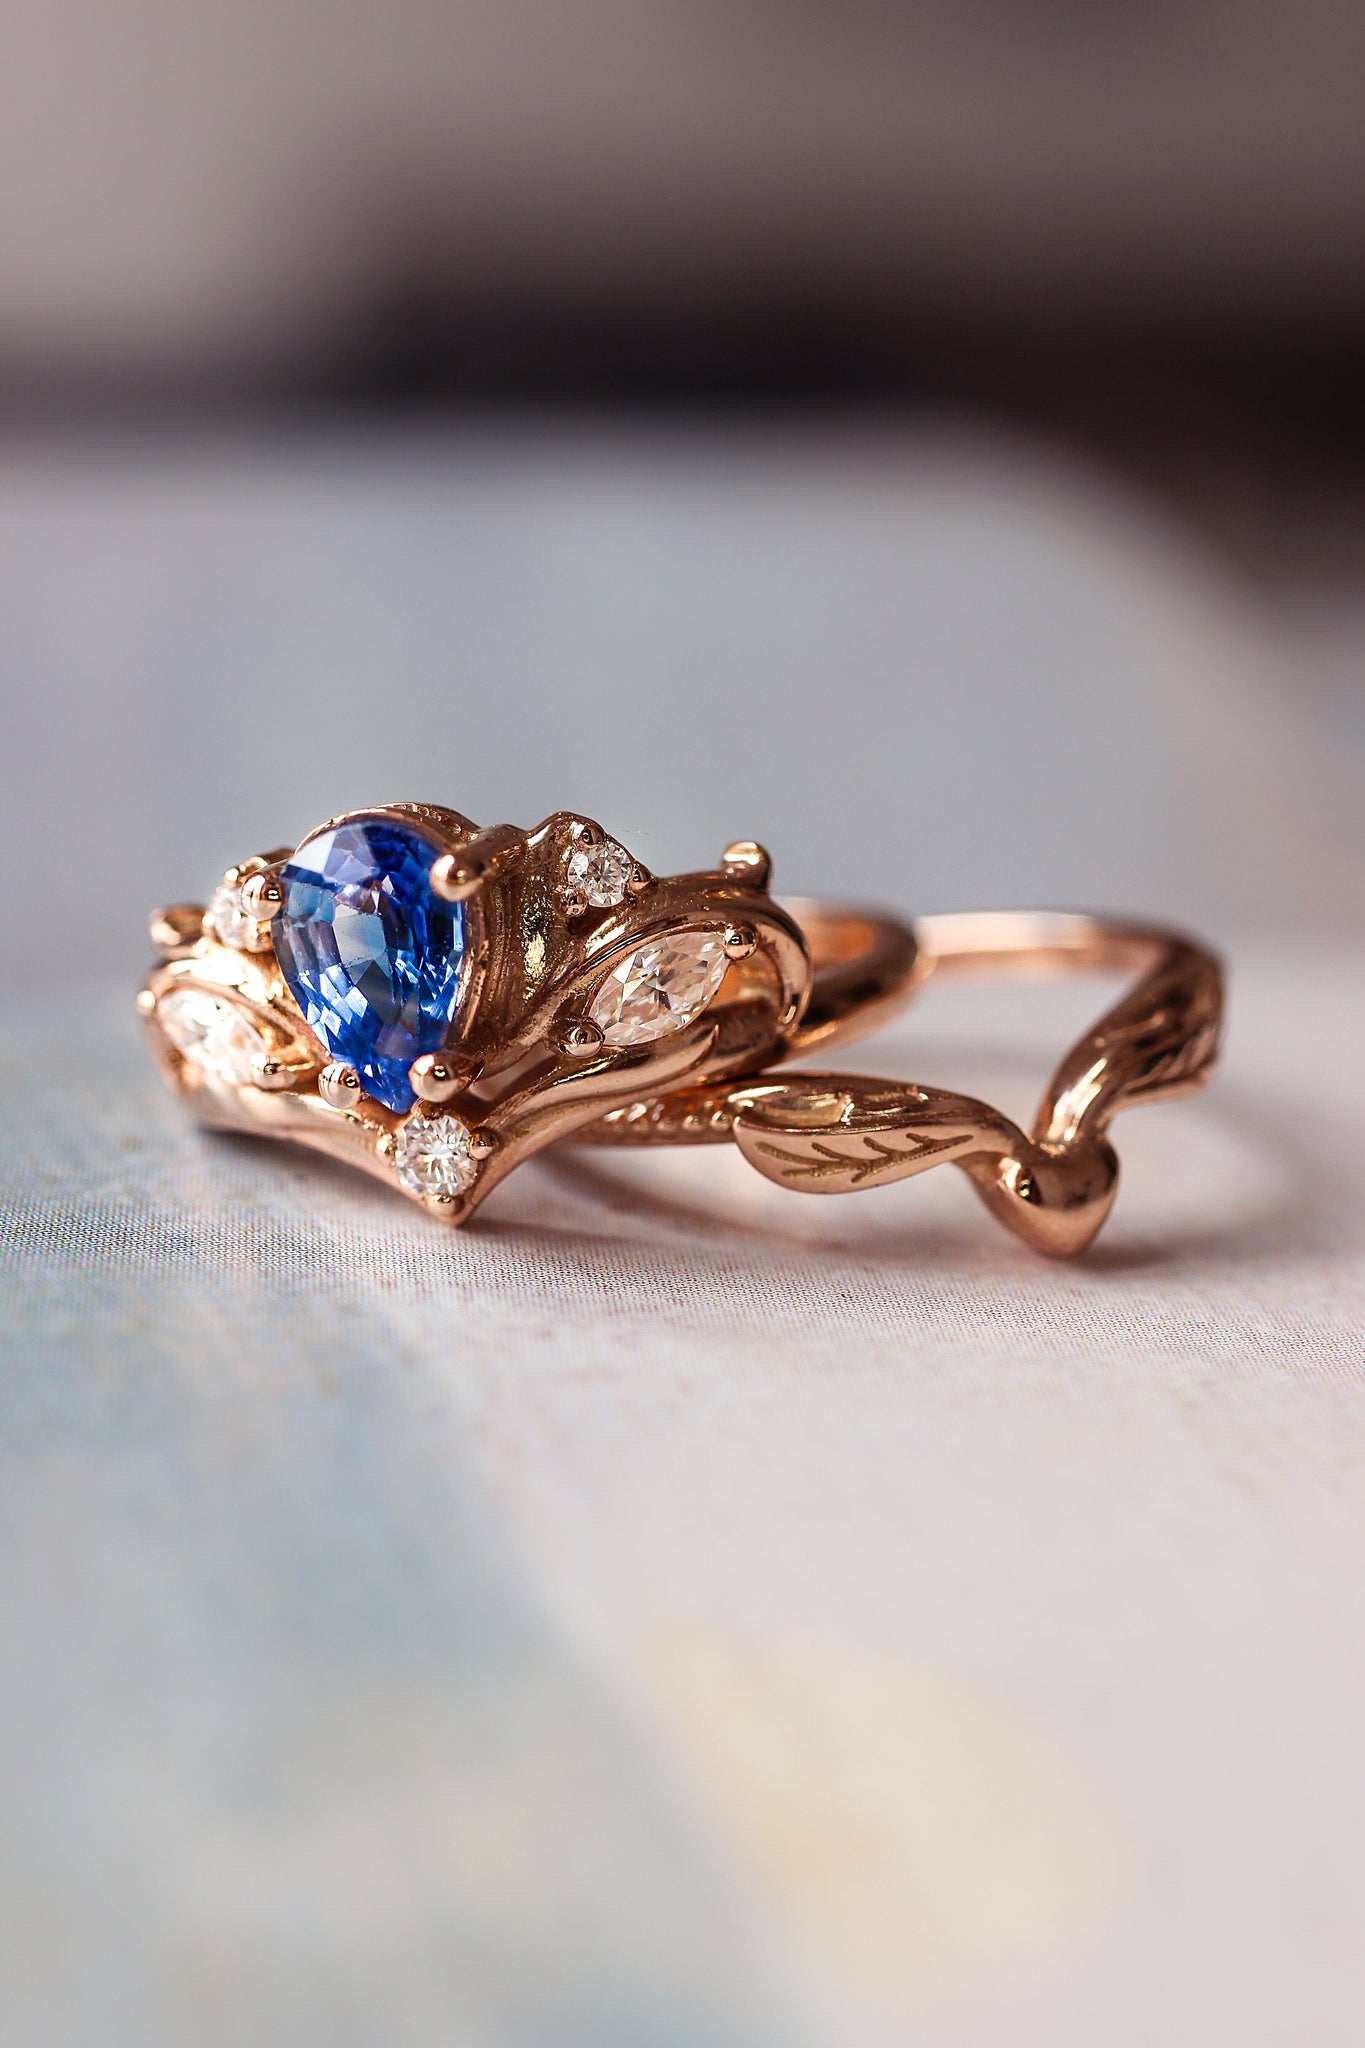 Bridal ring set with pear cut sapphire / Swanlake - Eden Garden Jewelry™